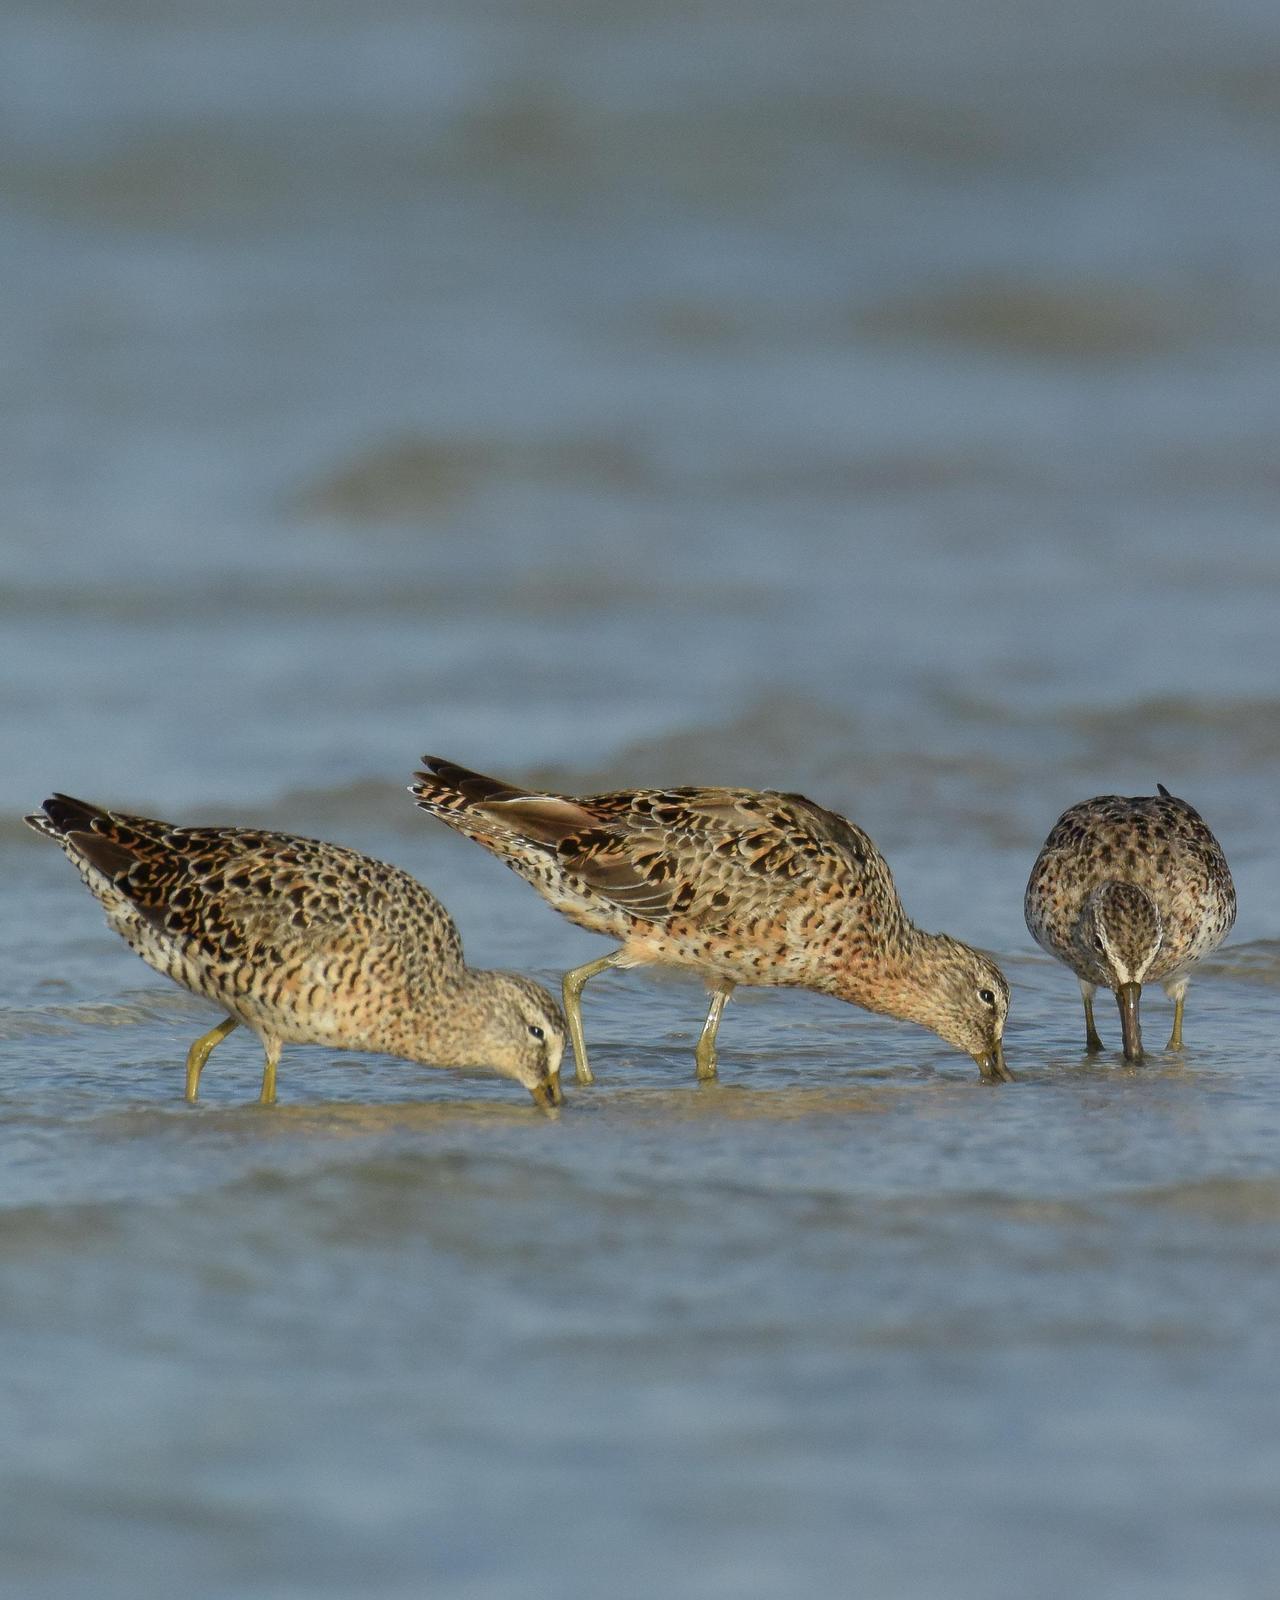 Short-billed Dowitcher Photo by Emily Percival